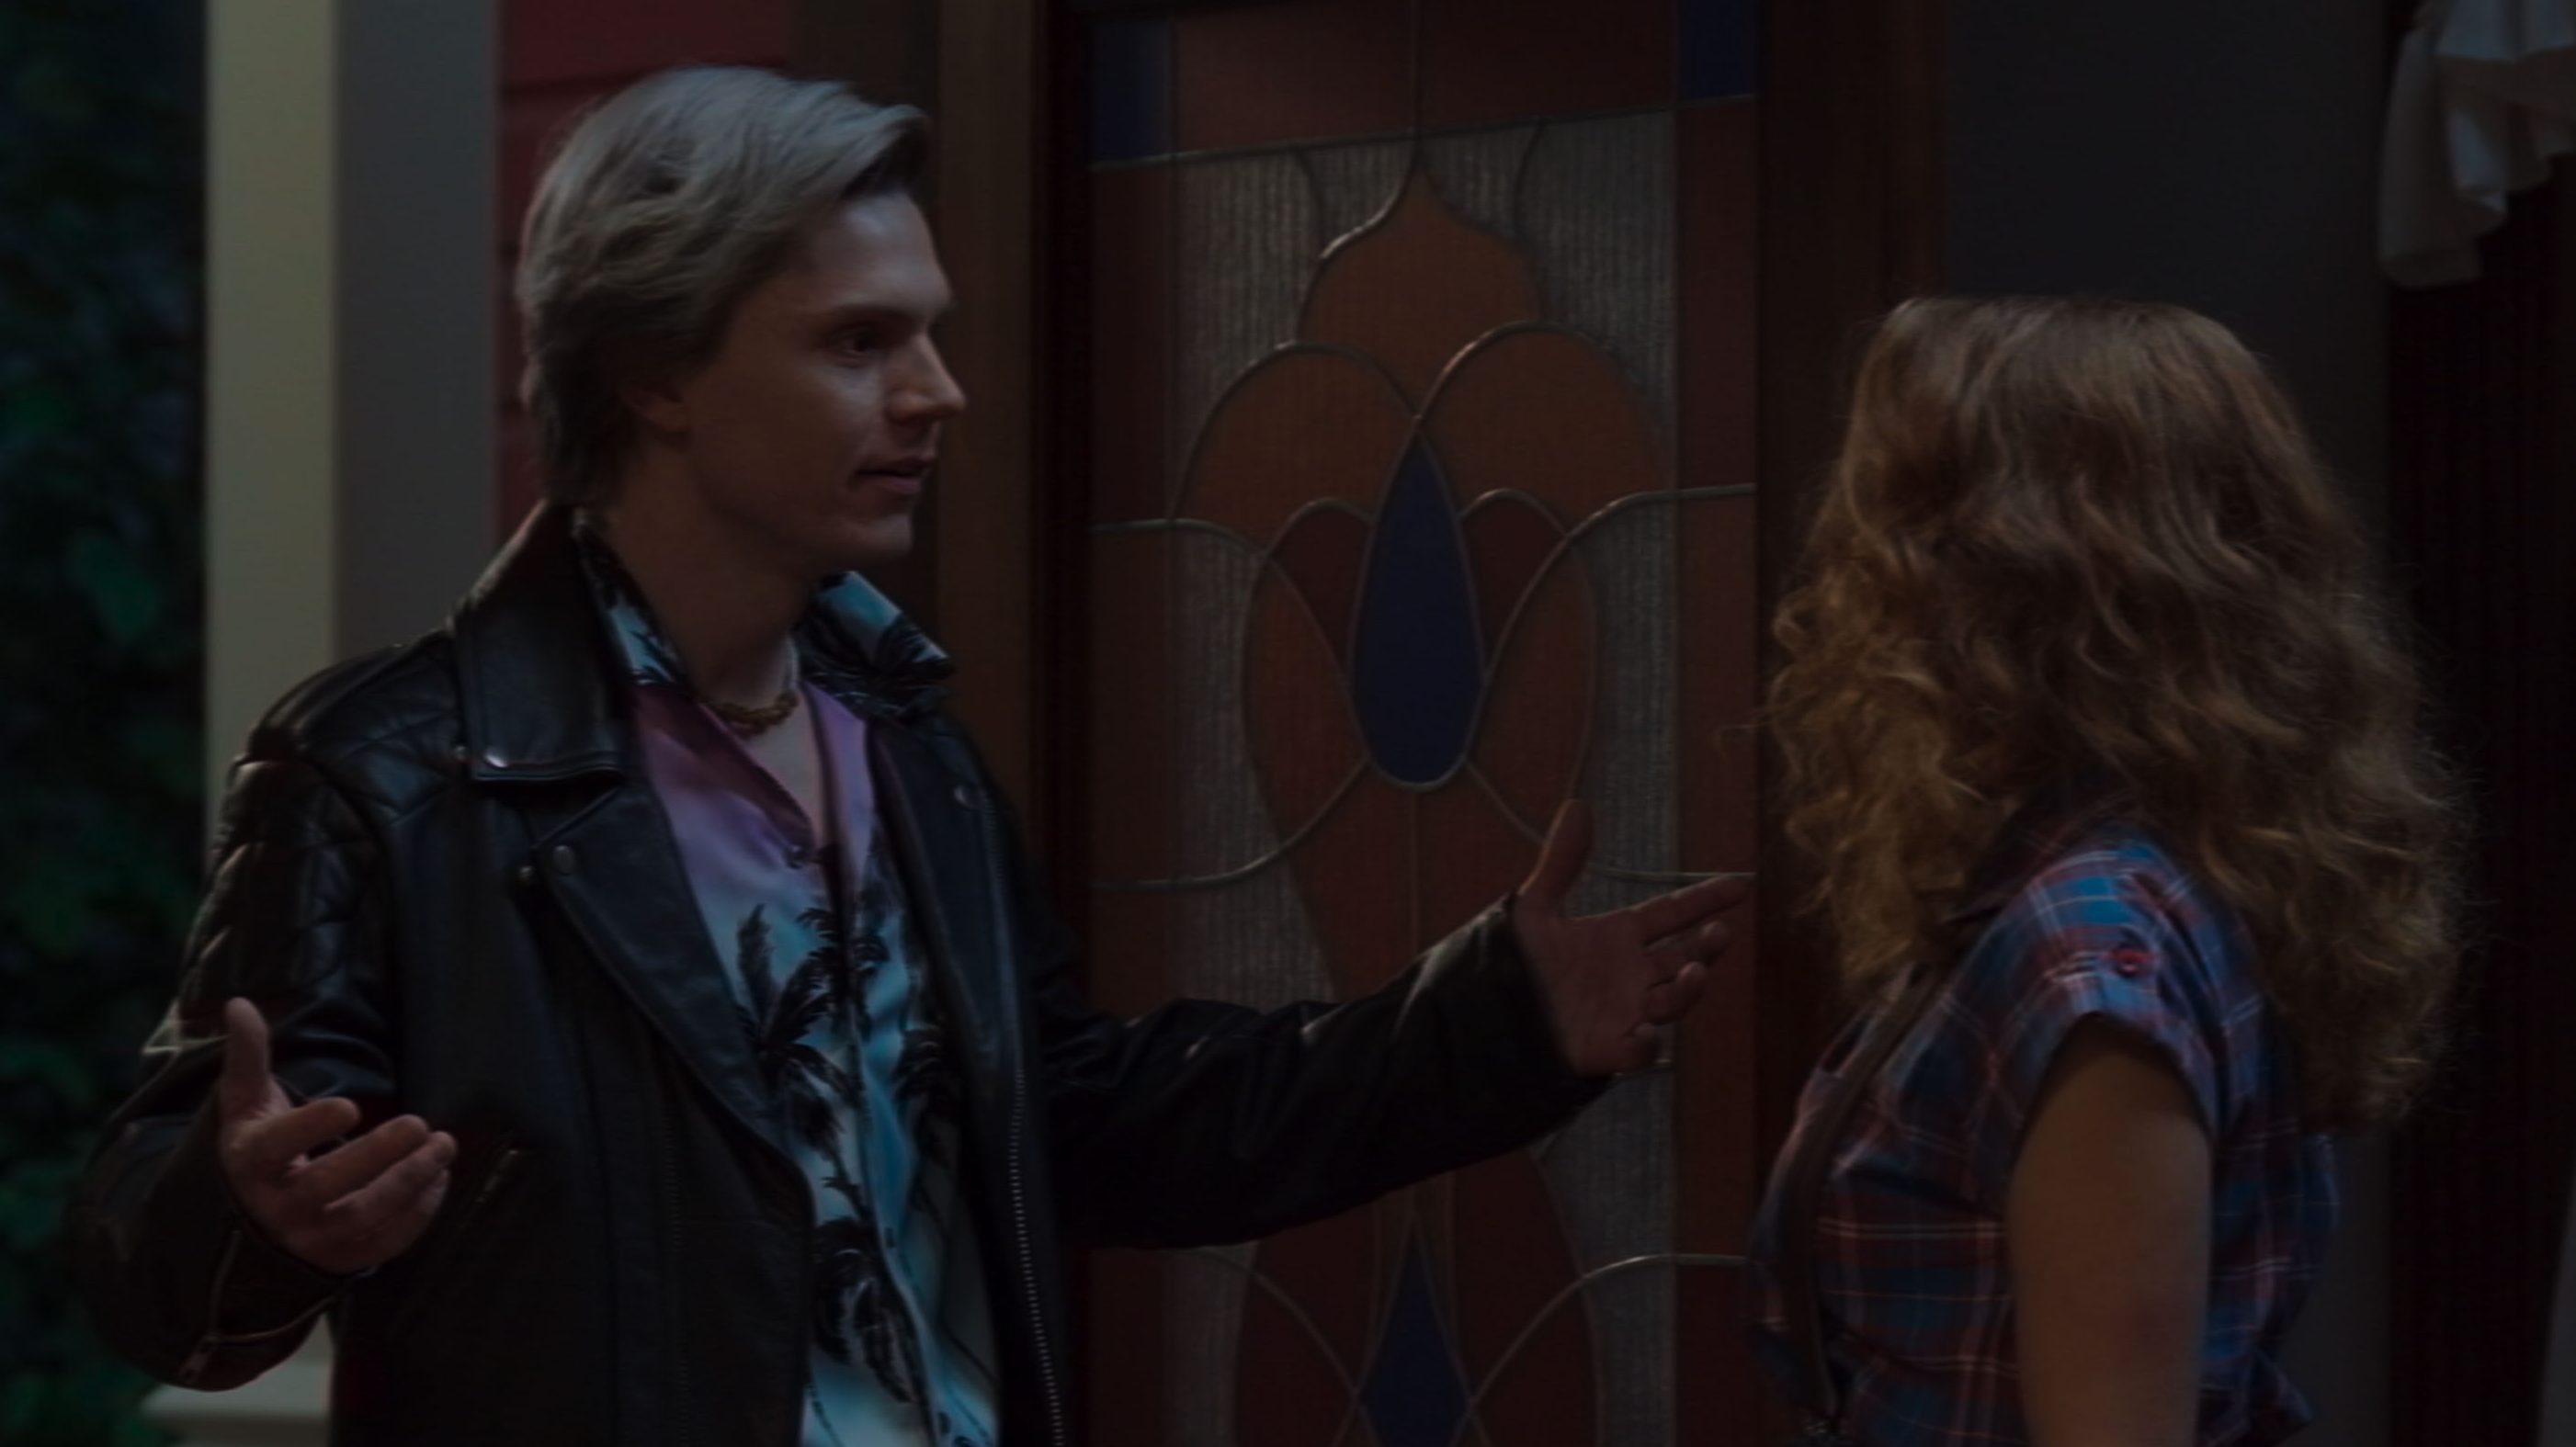 Wanda answers the front door to find her brother Pietro - only he is played by Evan Peters instead.